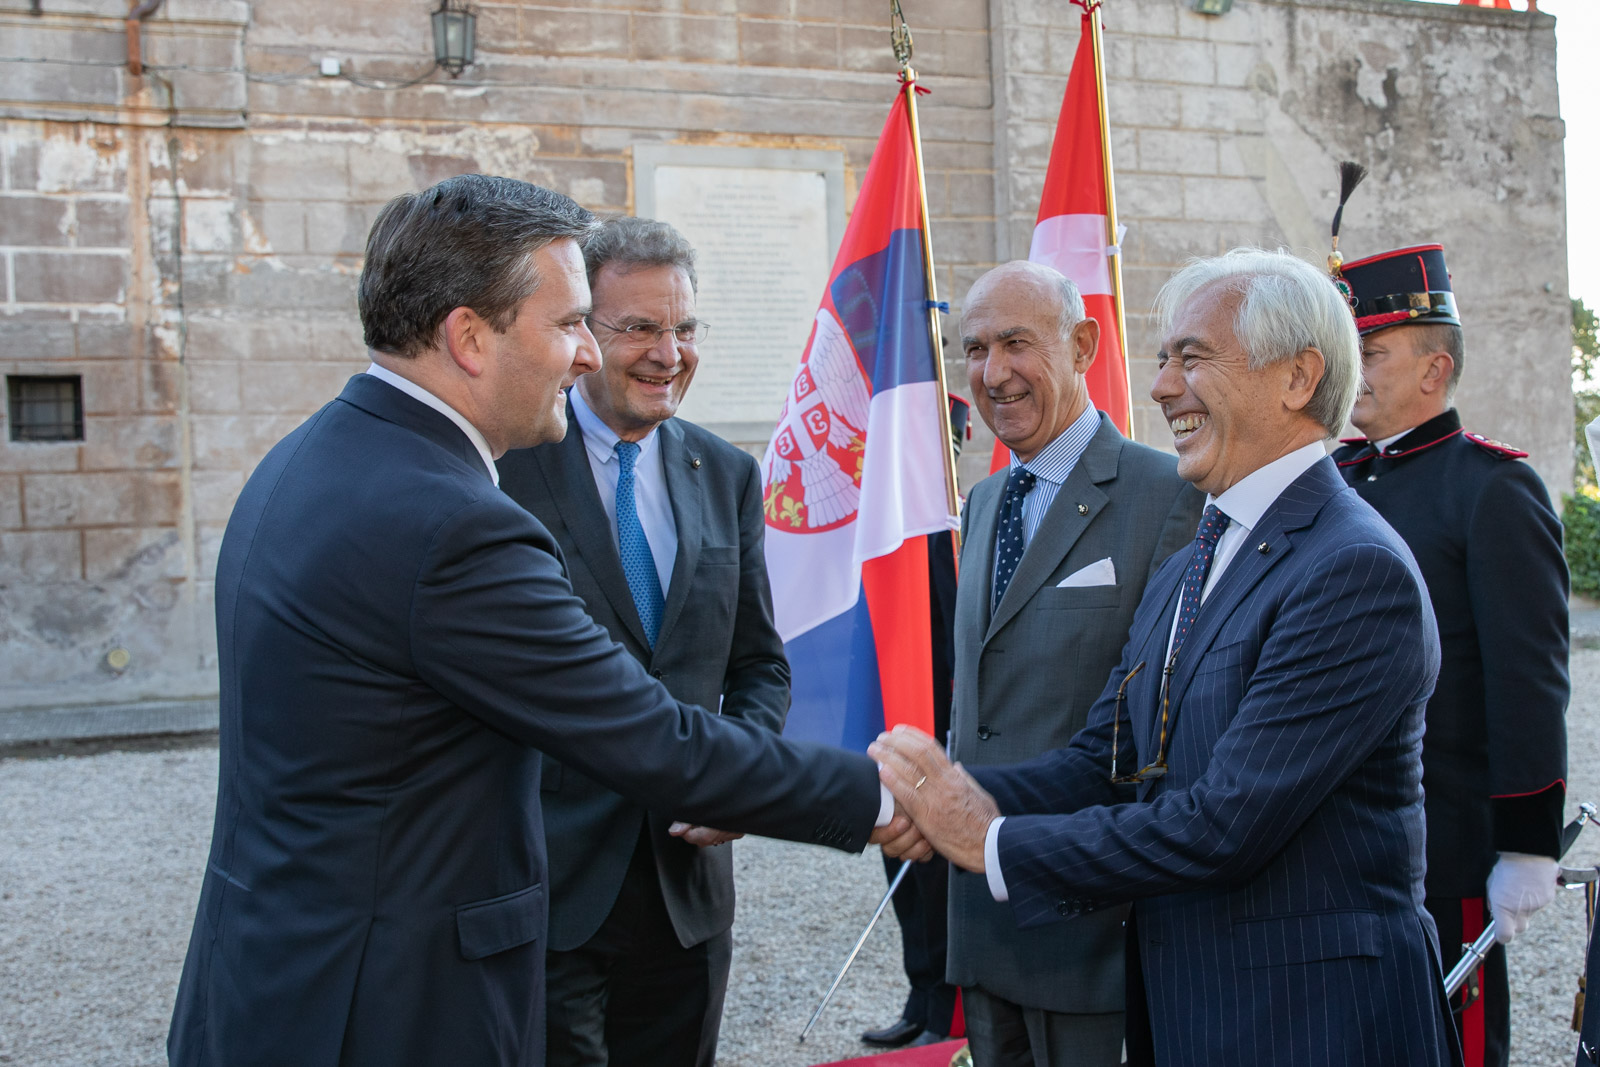 Minister of Foreign Affairs of the Republic of Serbia received at the Magistral Villa